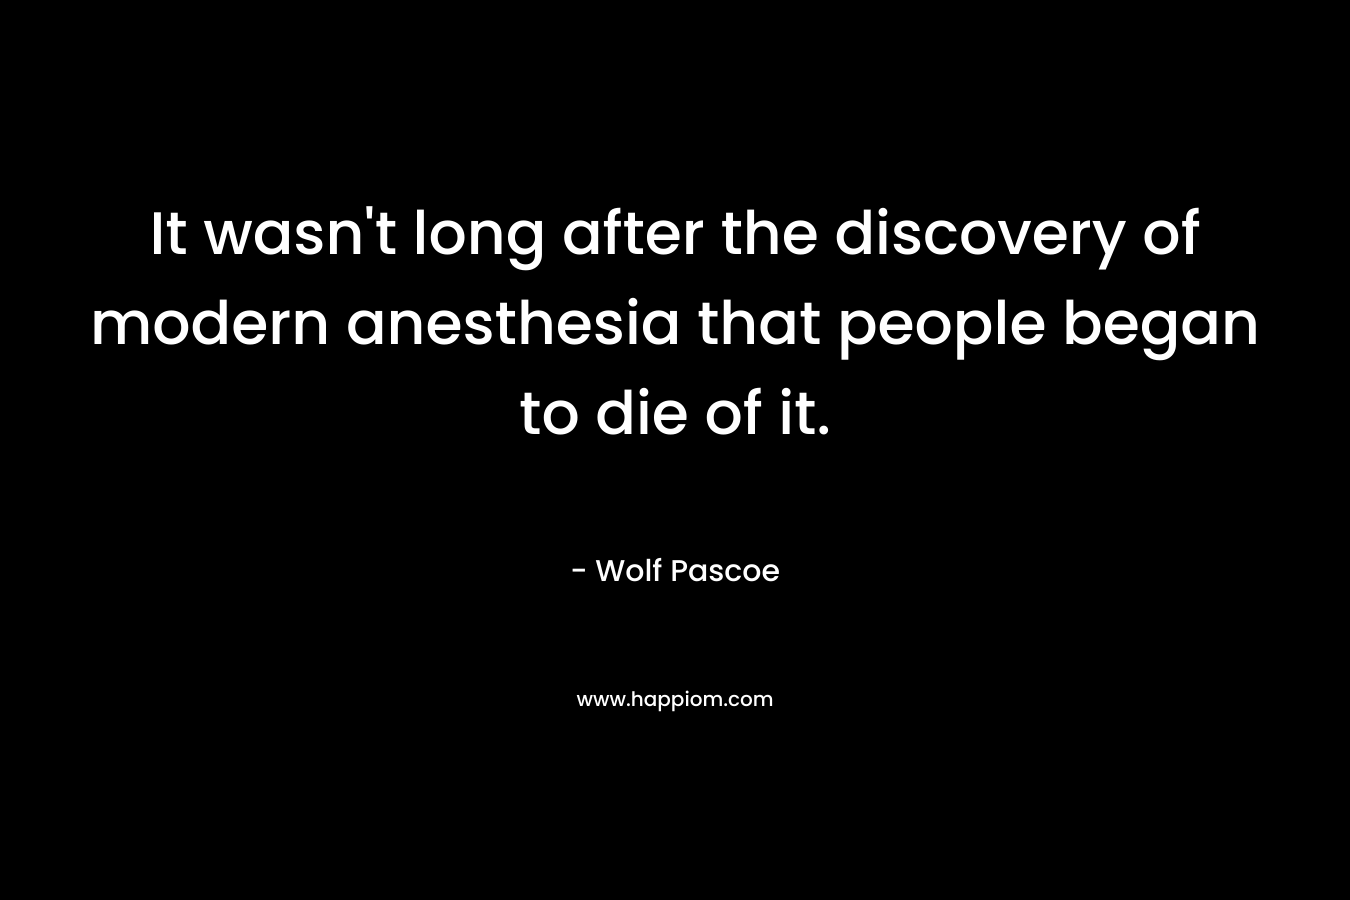 It wasn't long after the discovery of modern anesthesia that people began to die of it.